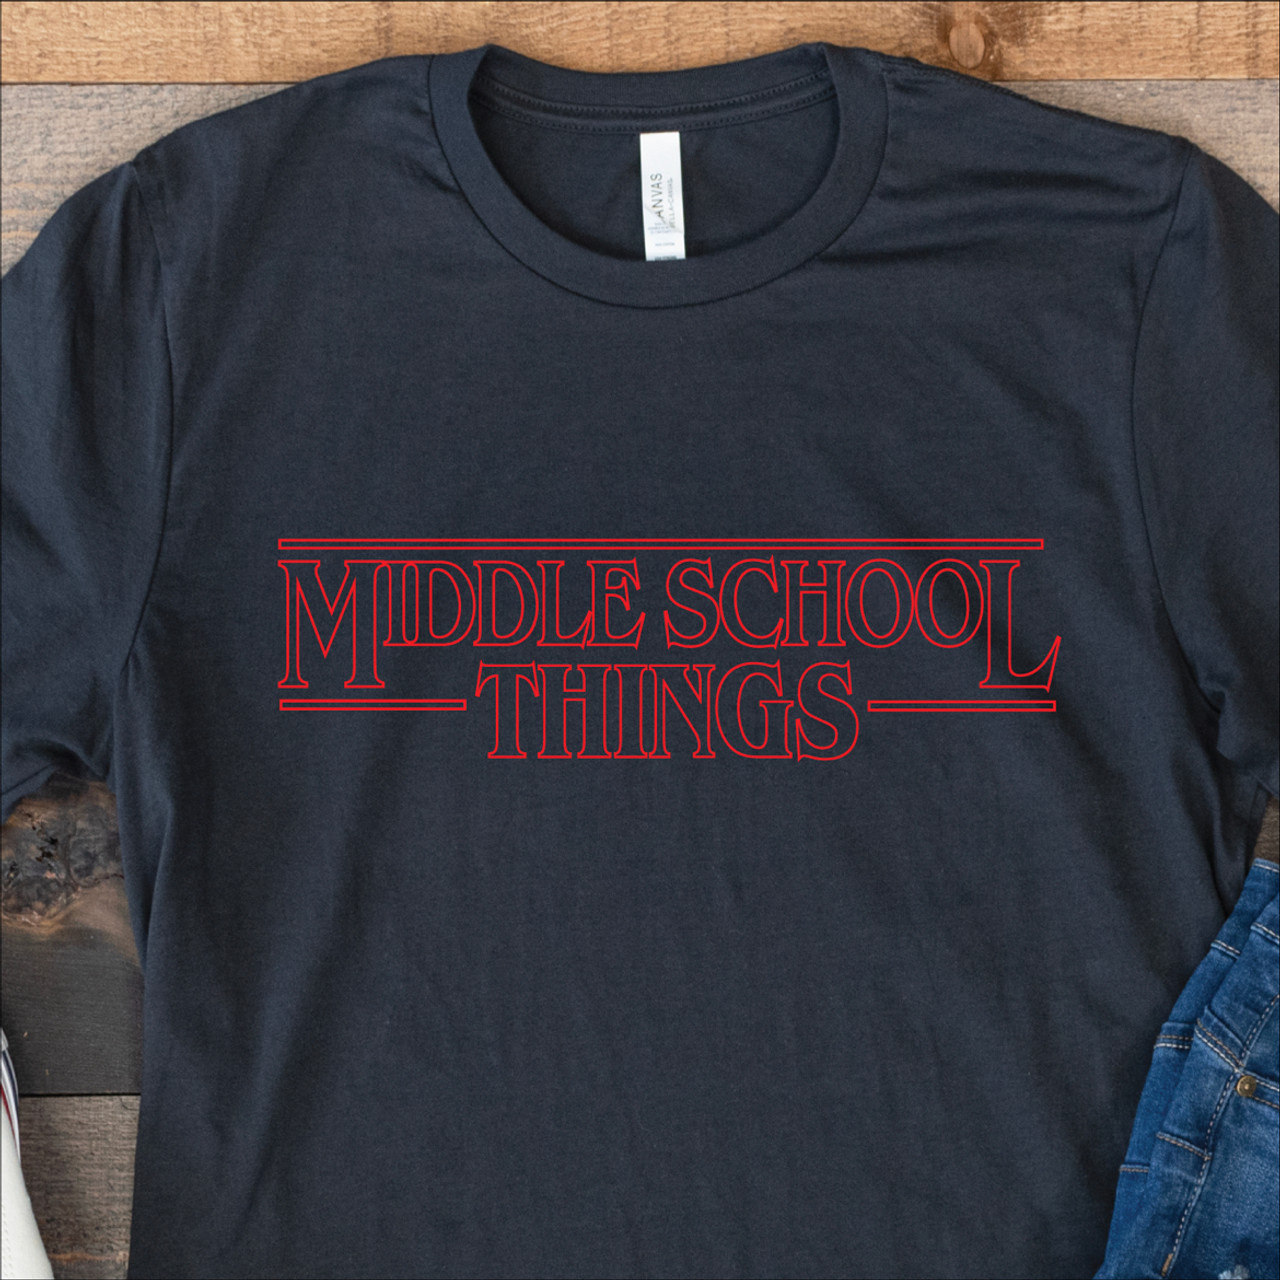 "Middle School Things" T-Shirt